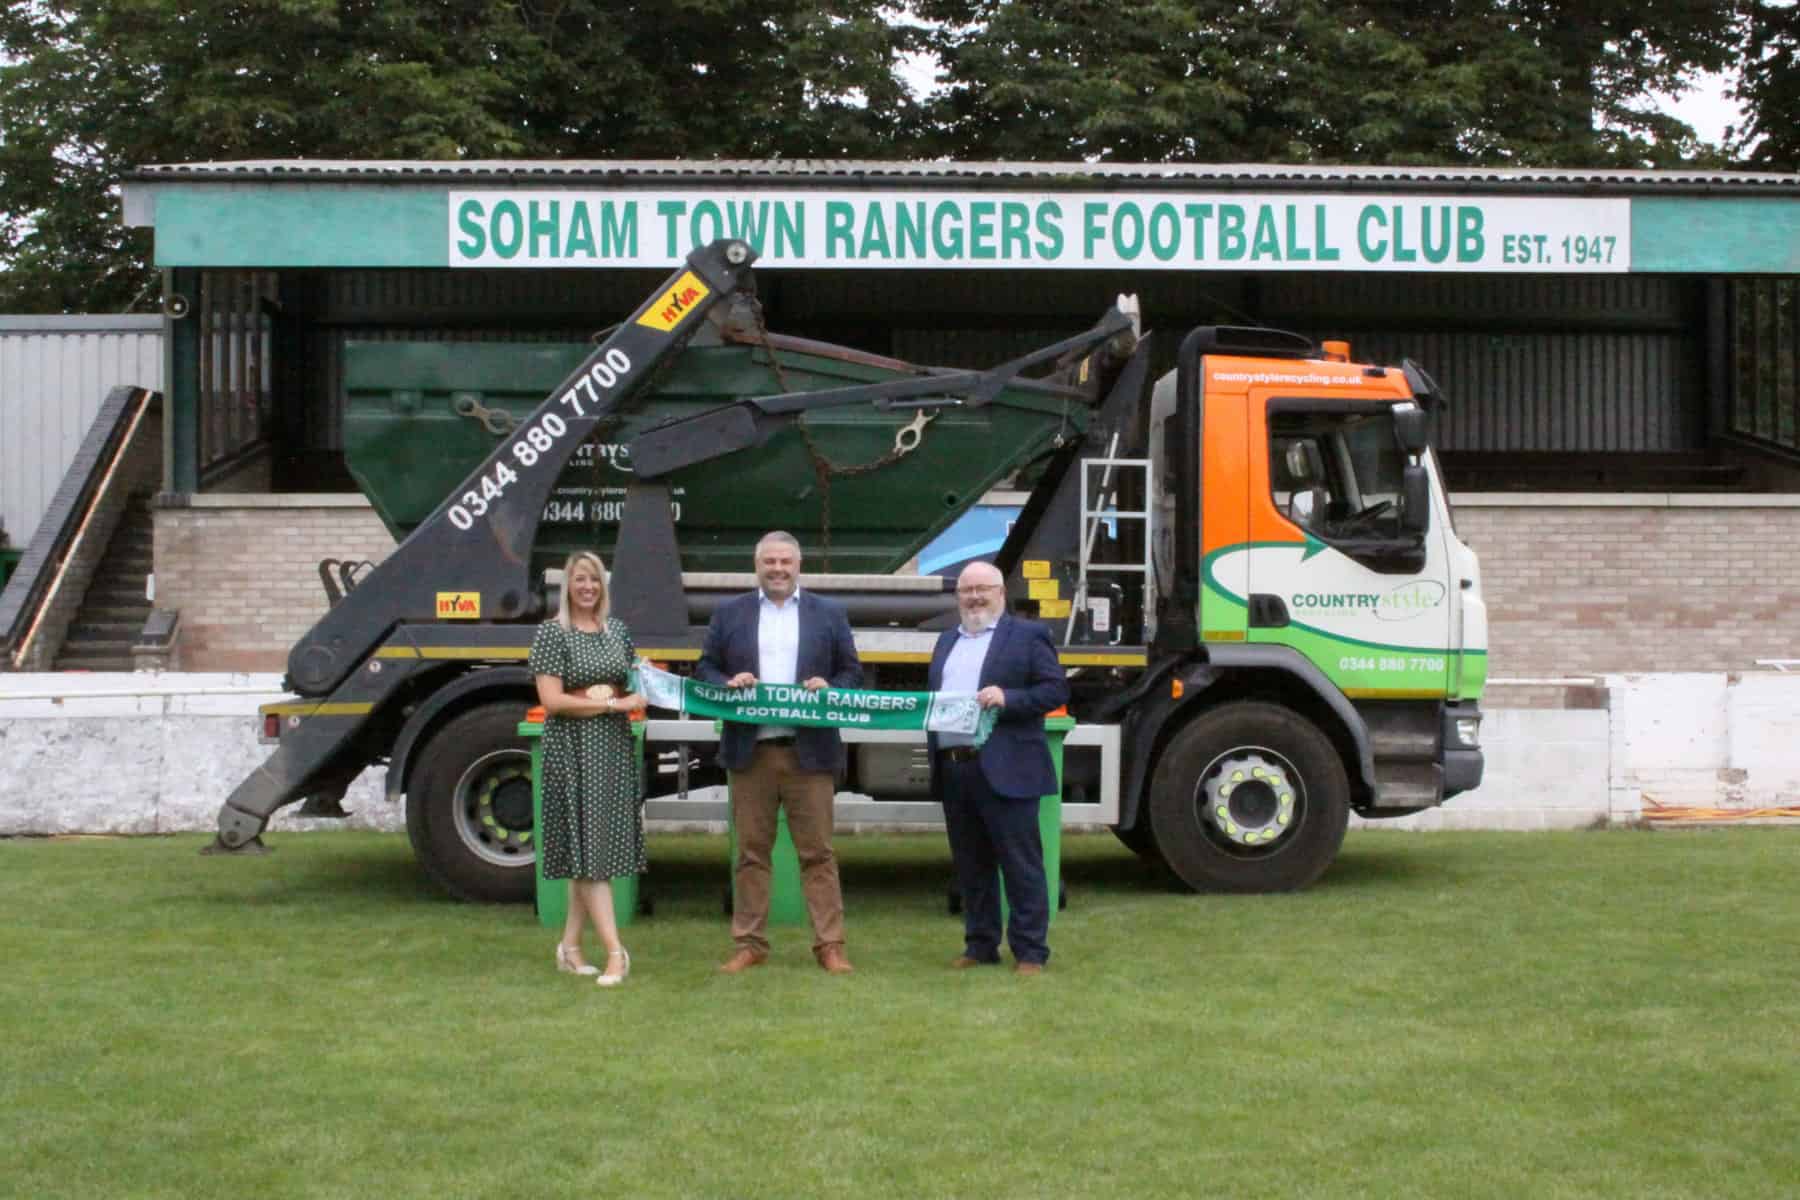 Countrystyle enters into partnership with Soham Town Rangers